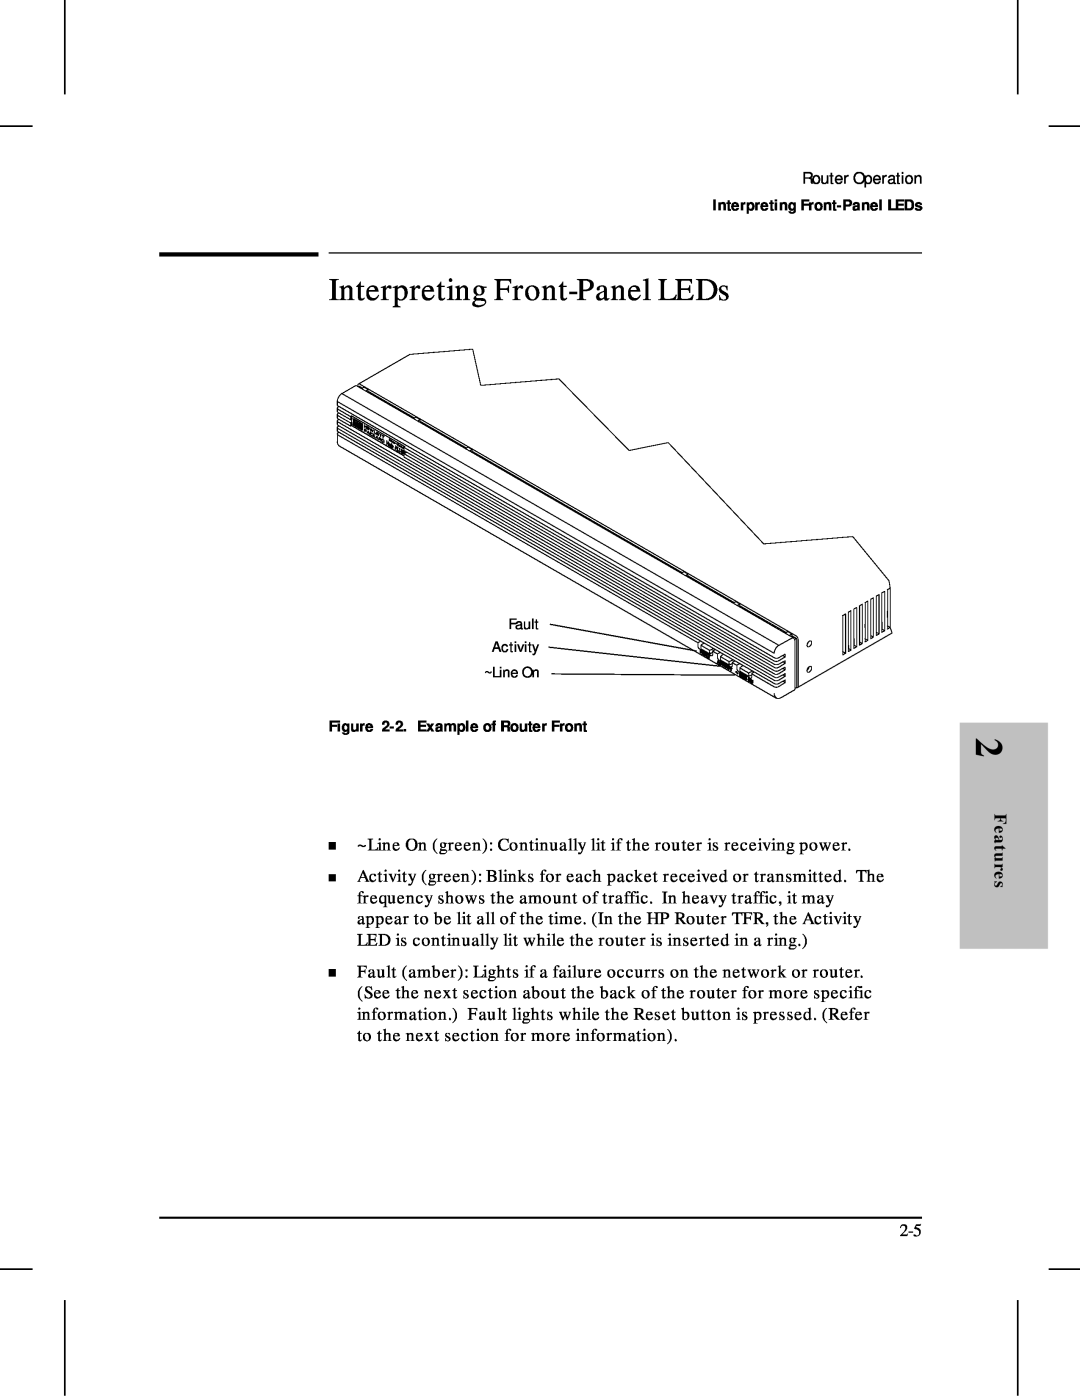 HP 480 manual Interpreting Front-Panel LEDs, 2. Example of Router Front, Features 